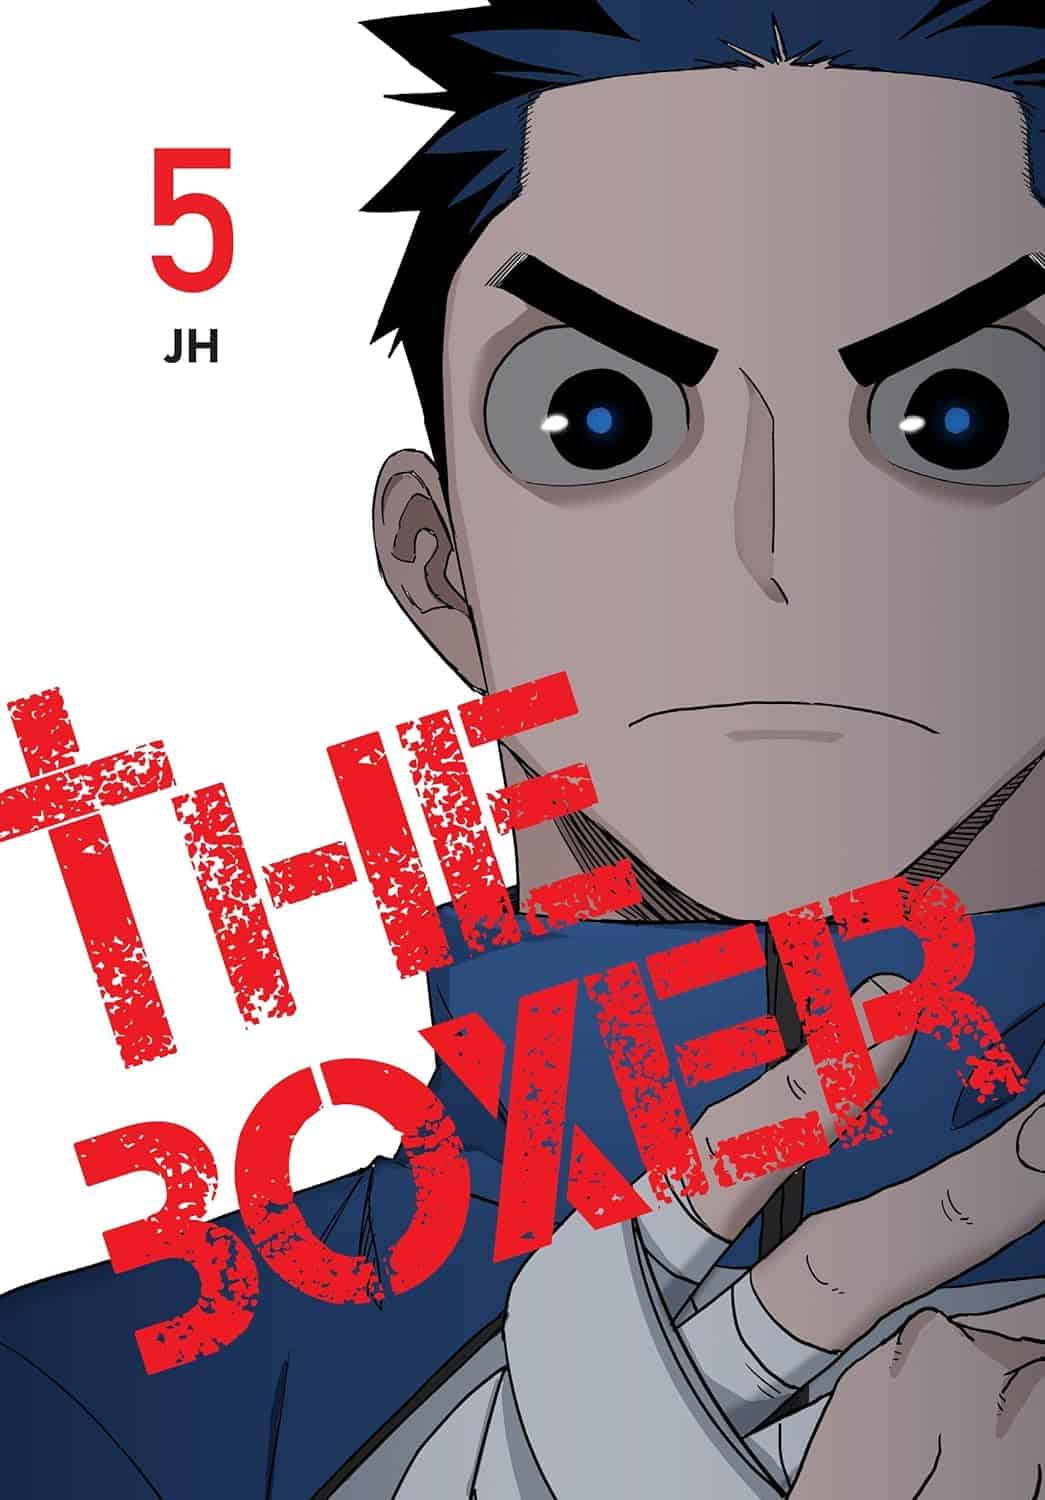 Cover for Volume 5 of The Boxer by JH